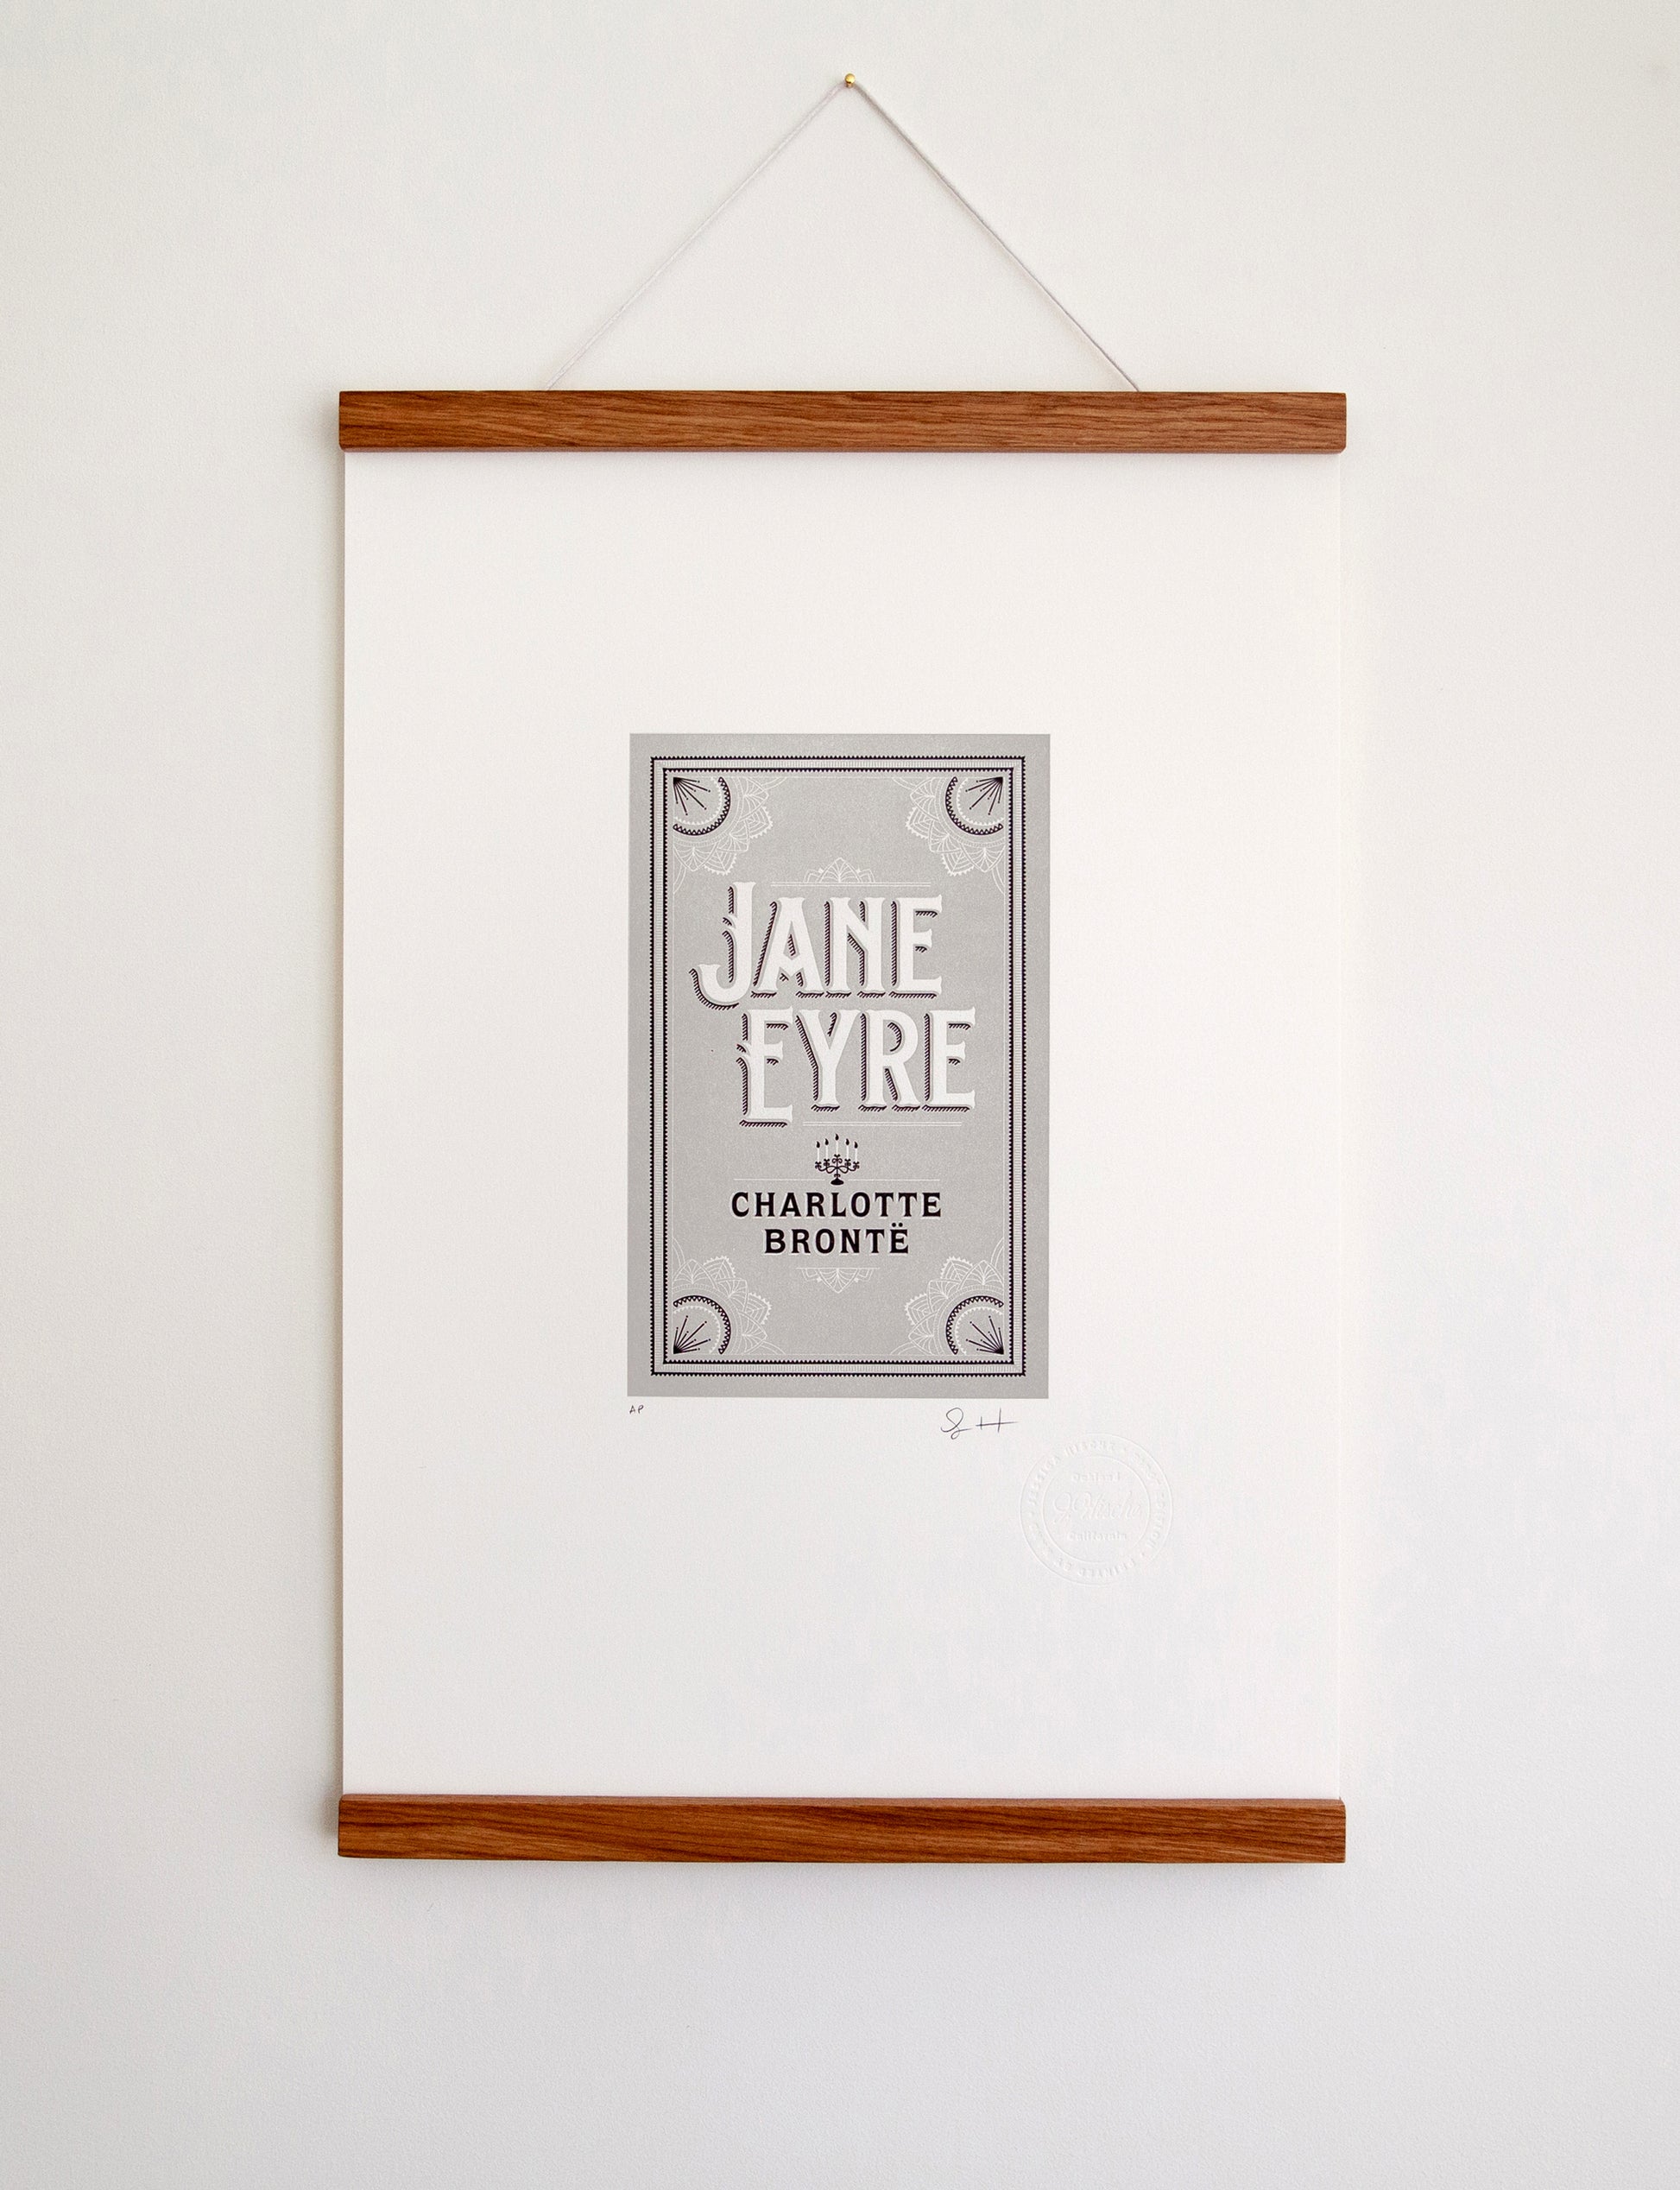 Framed 2-color letterpress print in gray and black. Printed artwork is an illustrated book cover of Jane Eyre including custom hand lettering.